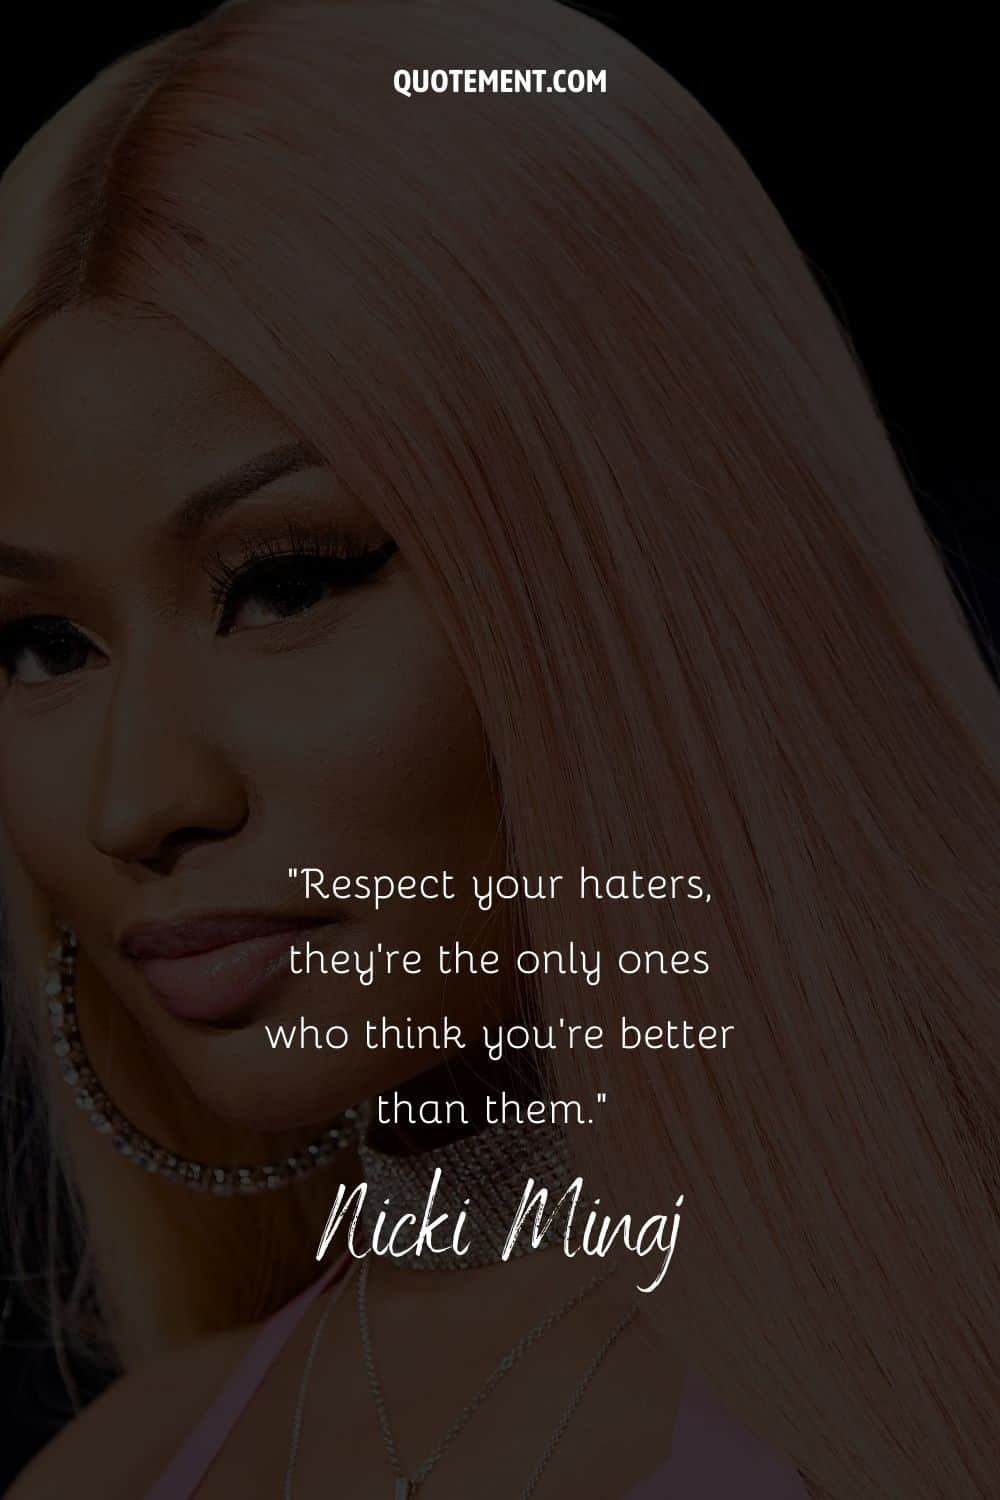 Sassy quote by Nicki Minaj and her photo in the background